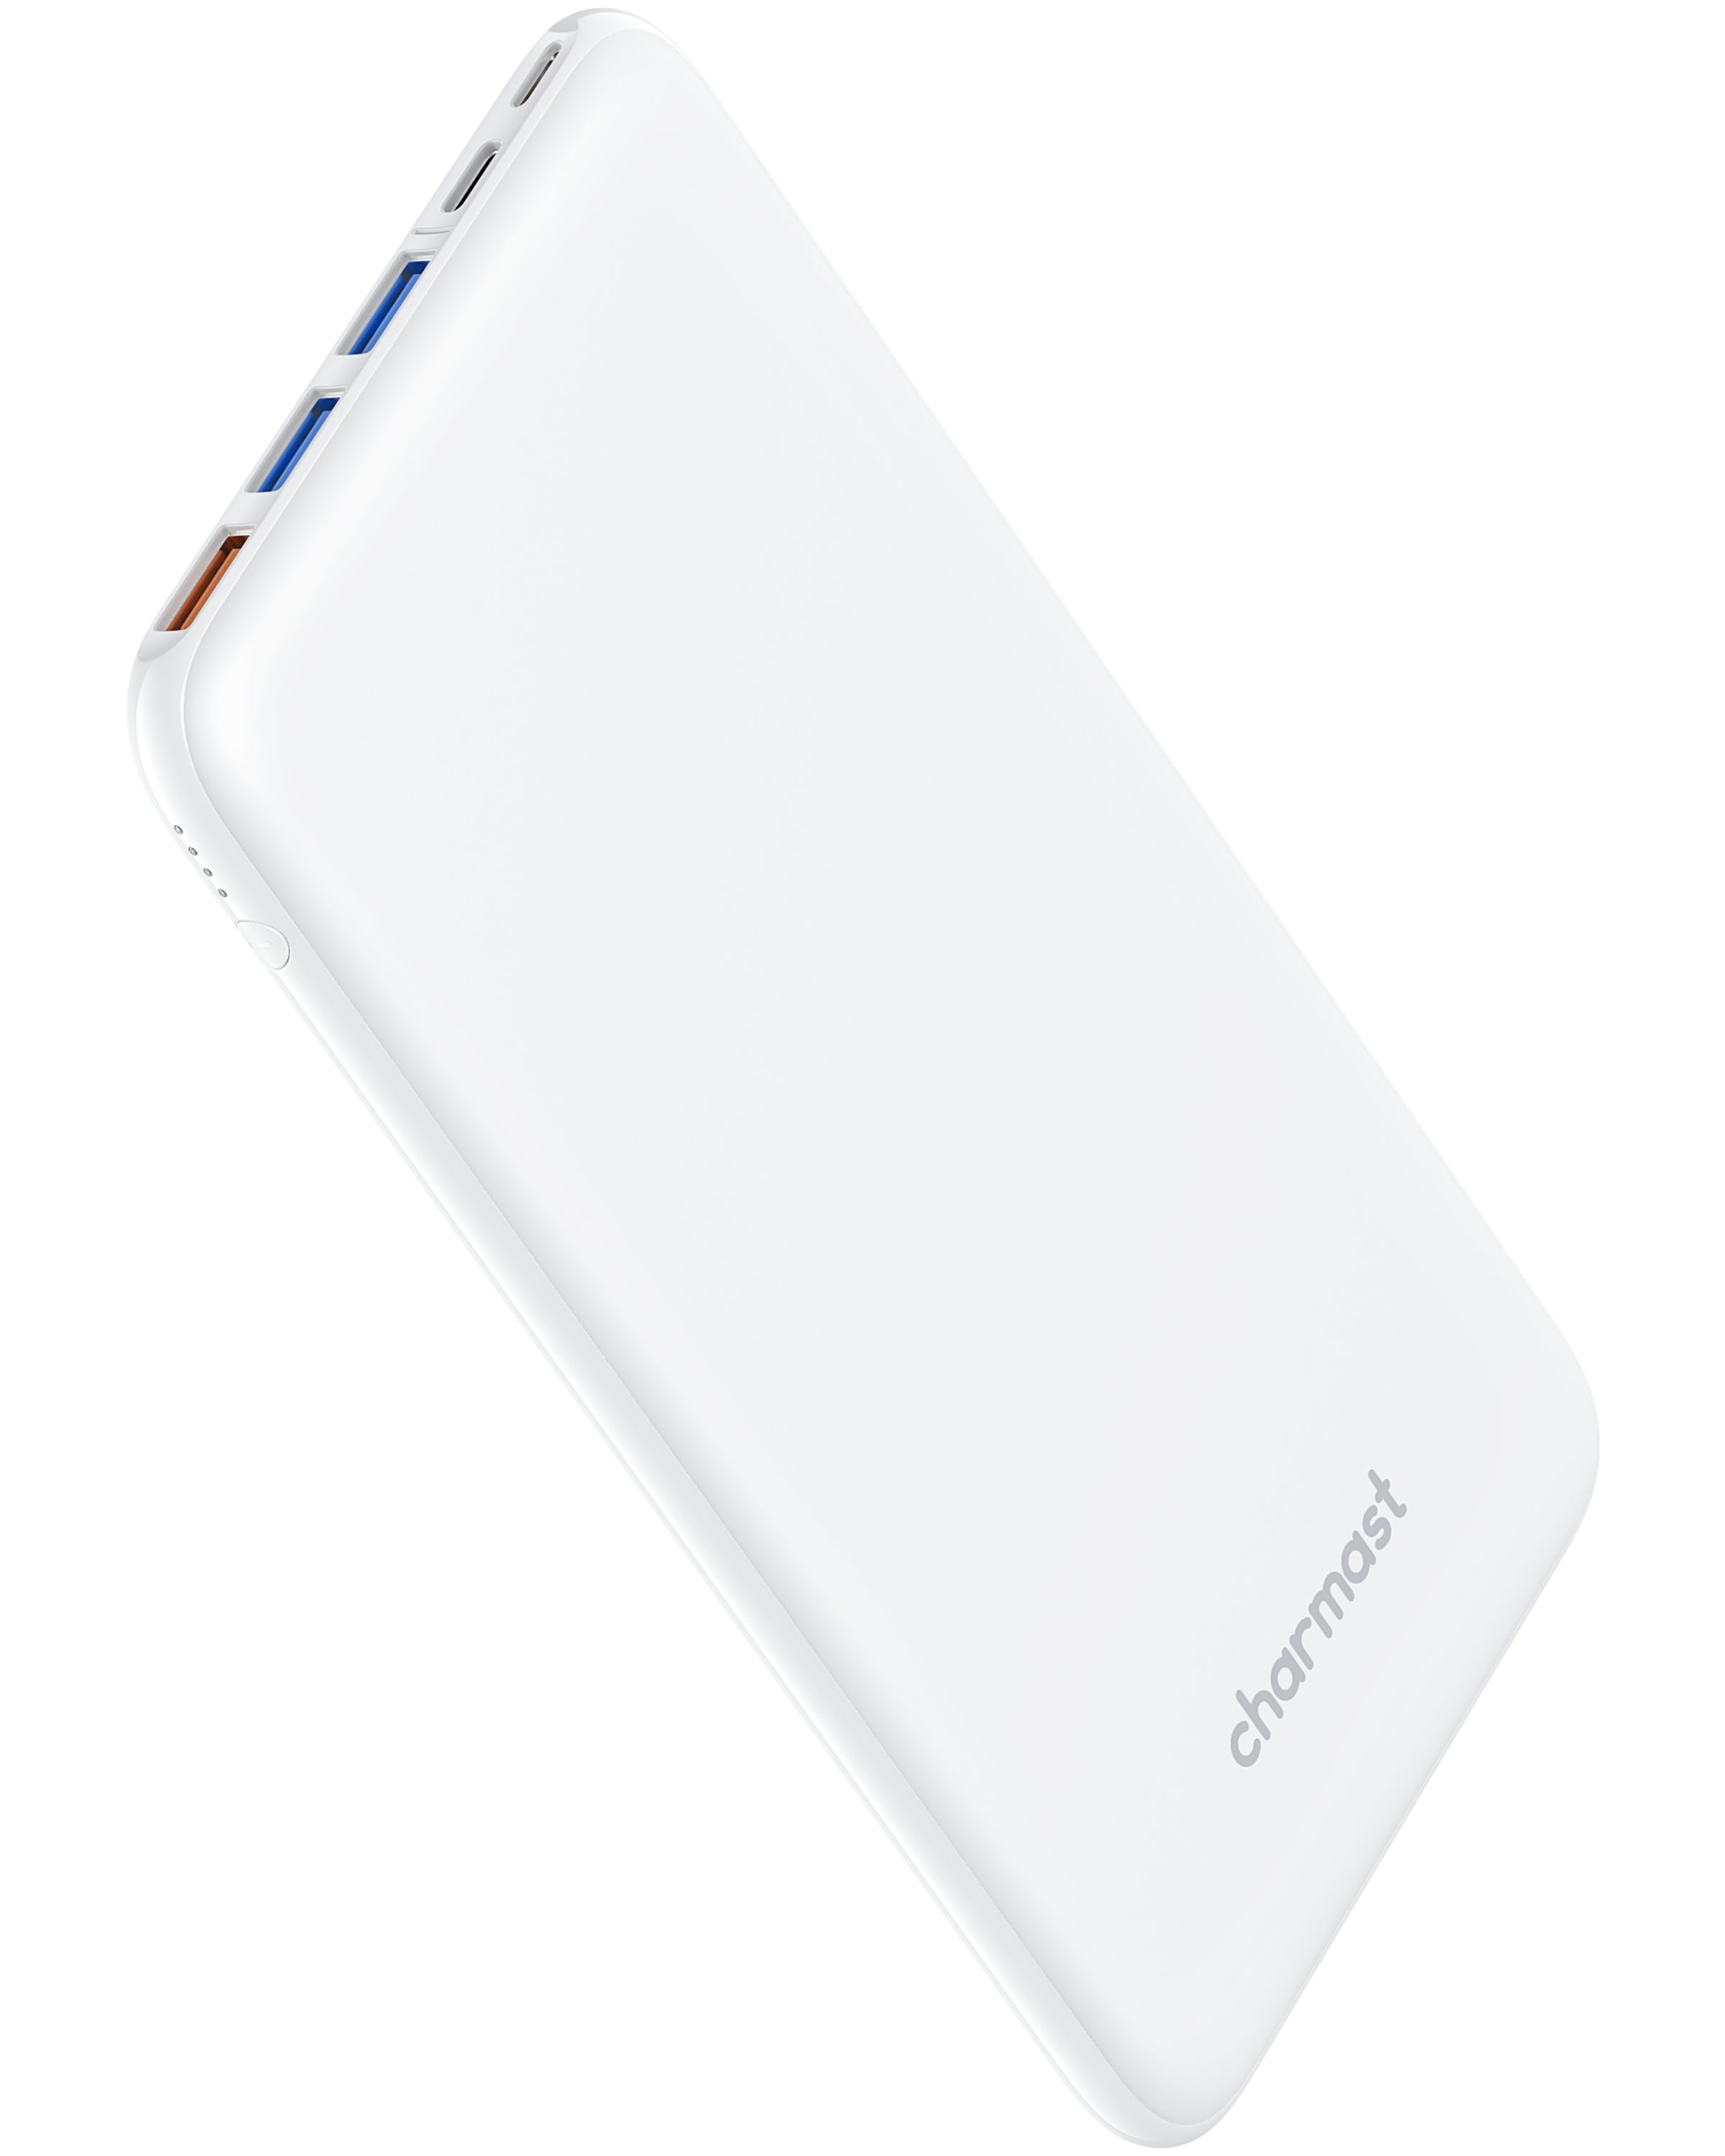 Ultra Slim | Multiple Ports | Fast Charging Power Bank